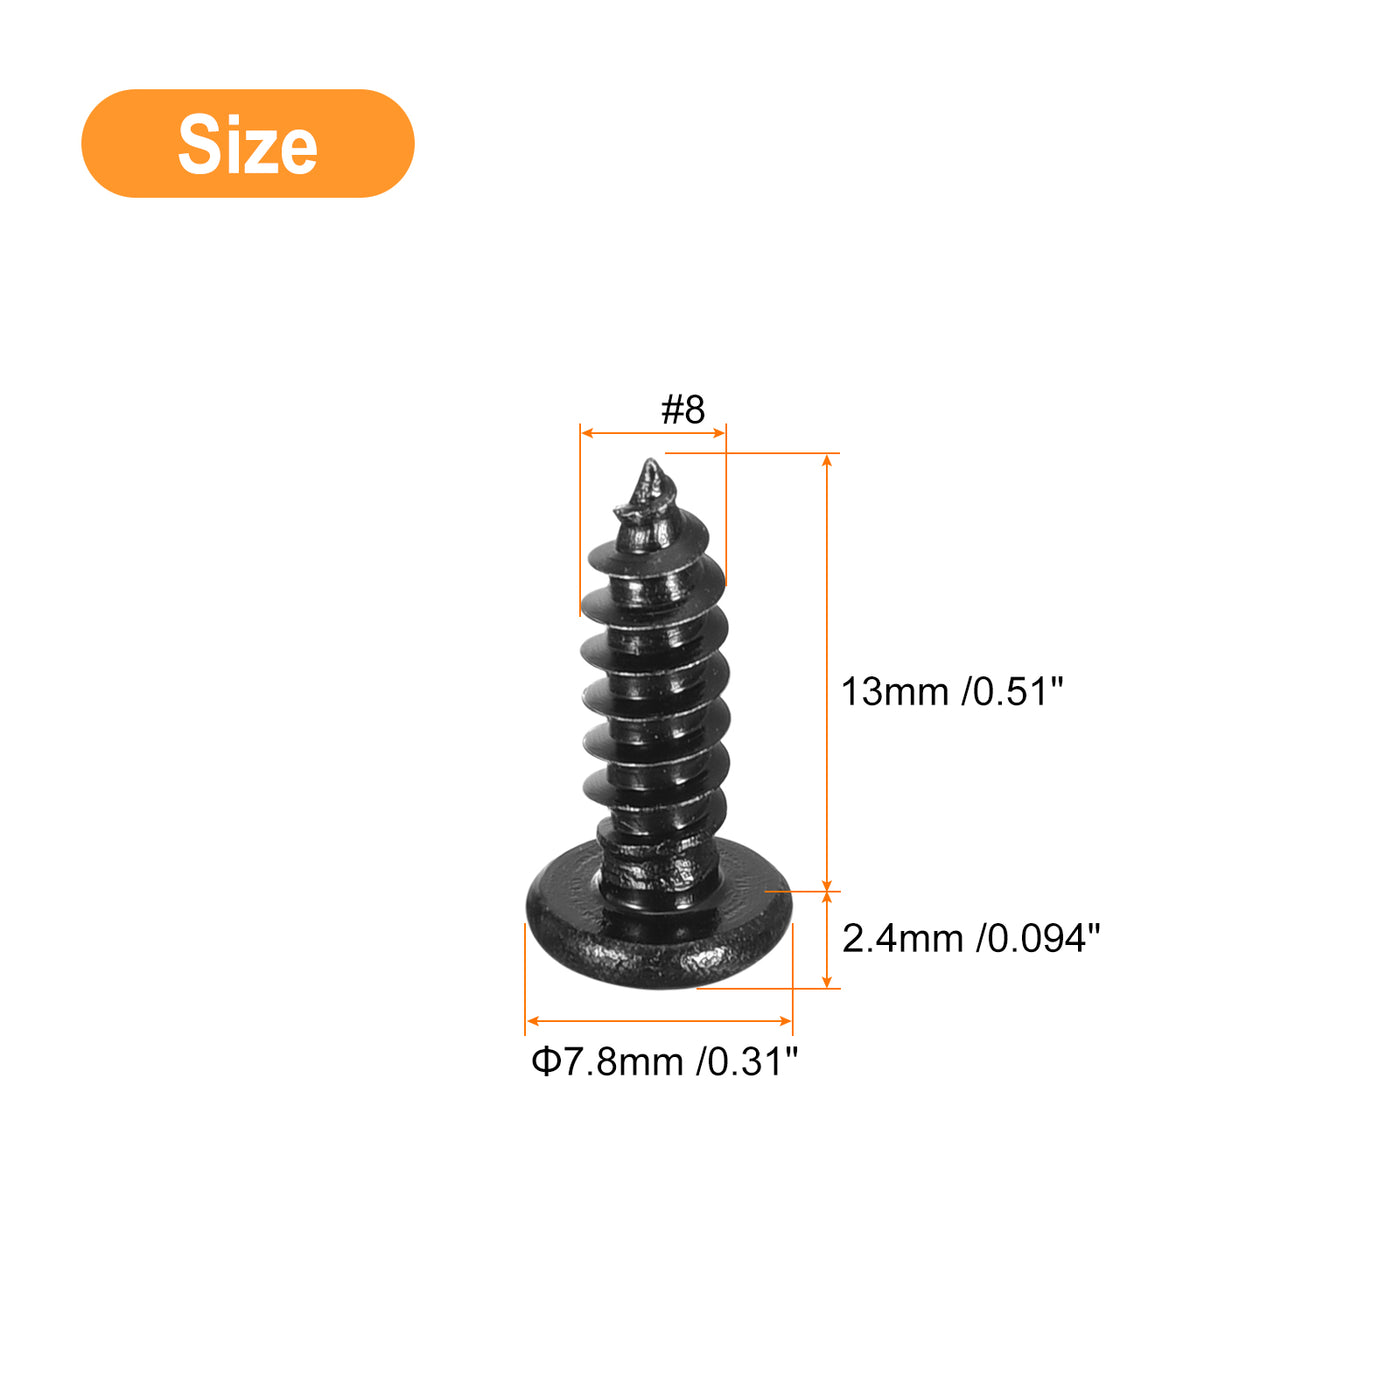 uxcell Uxcell #8 x 1/2" Phillips Pan Head Self-tapping Screw, 50pcs - 304 Stainless Steel Round Head Wood Screw Full Thread (Black)